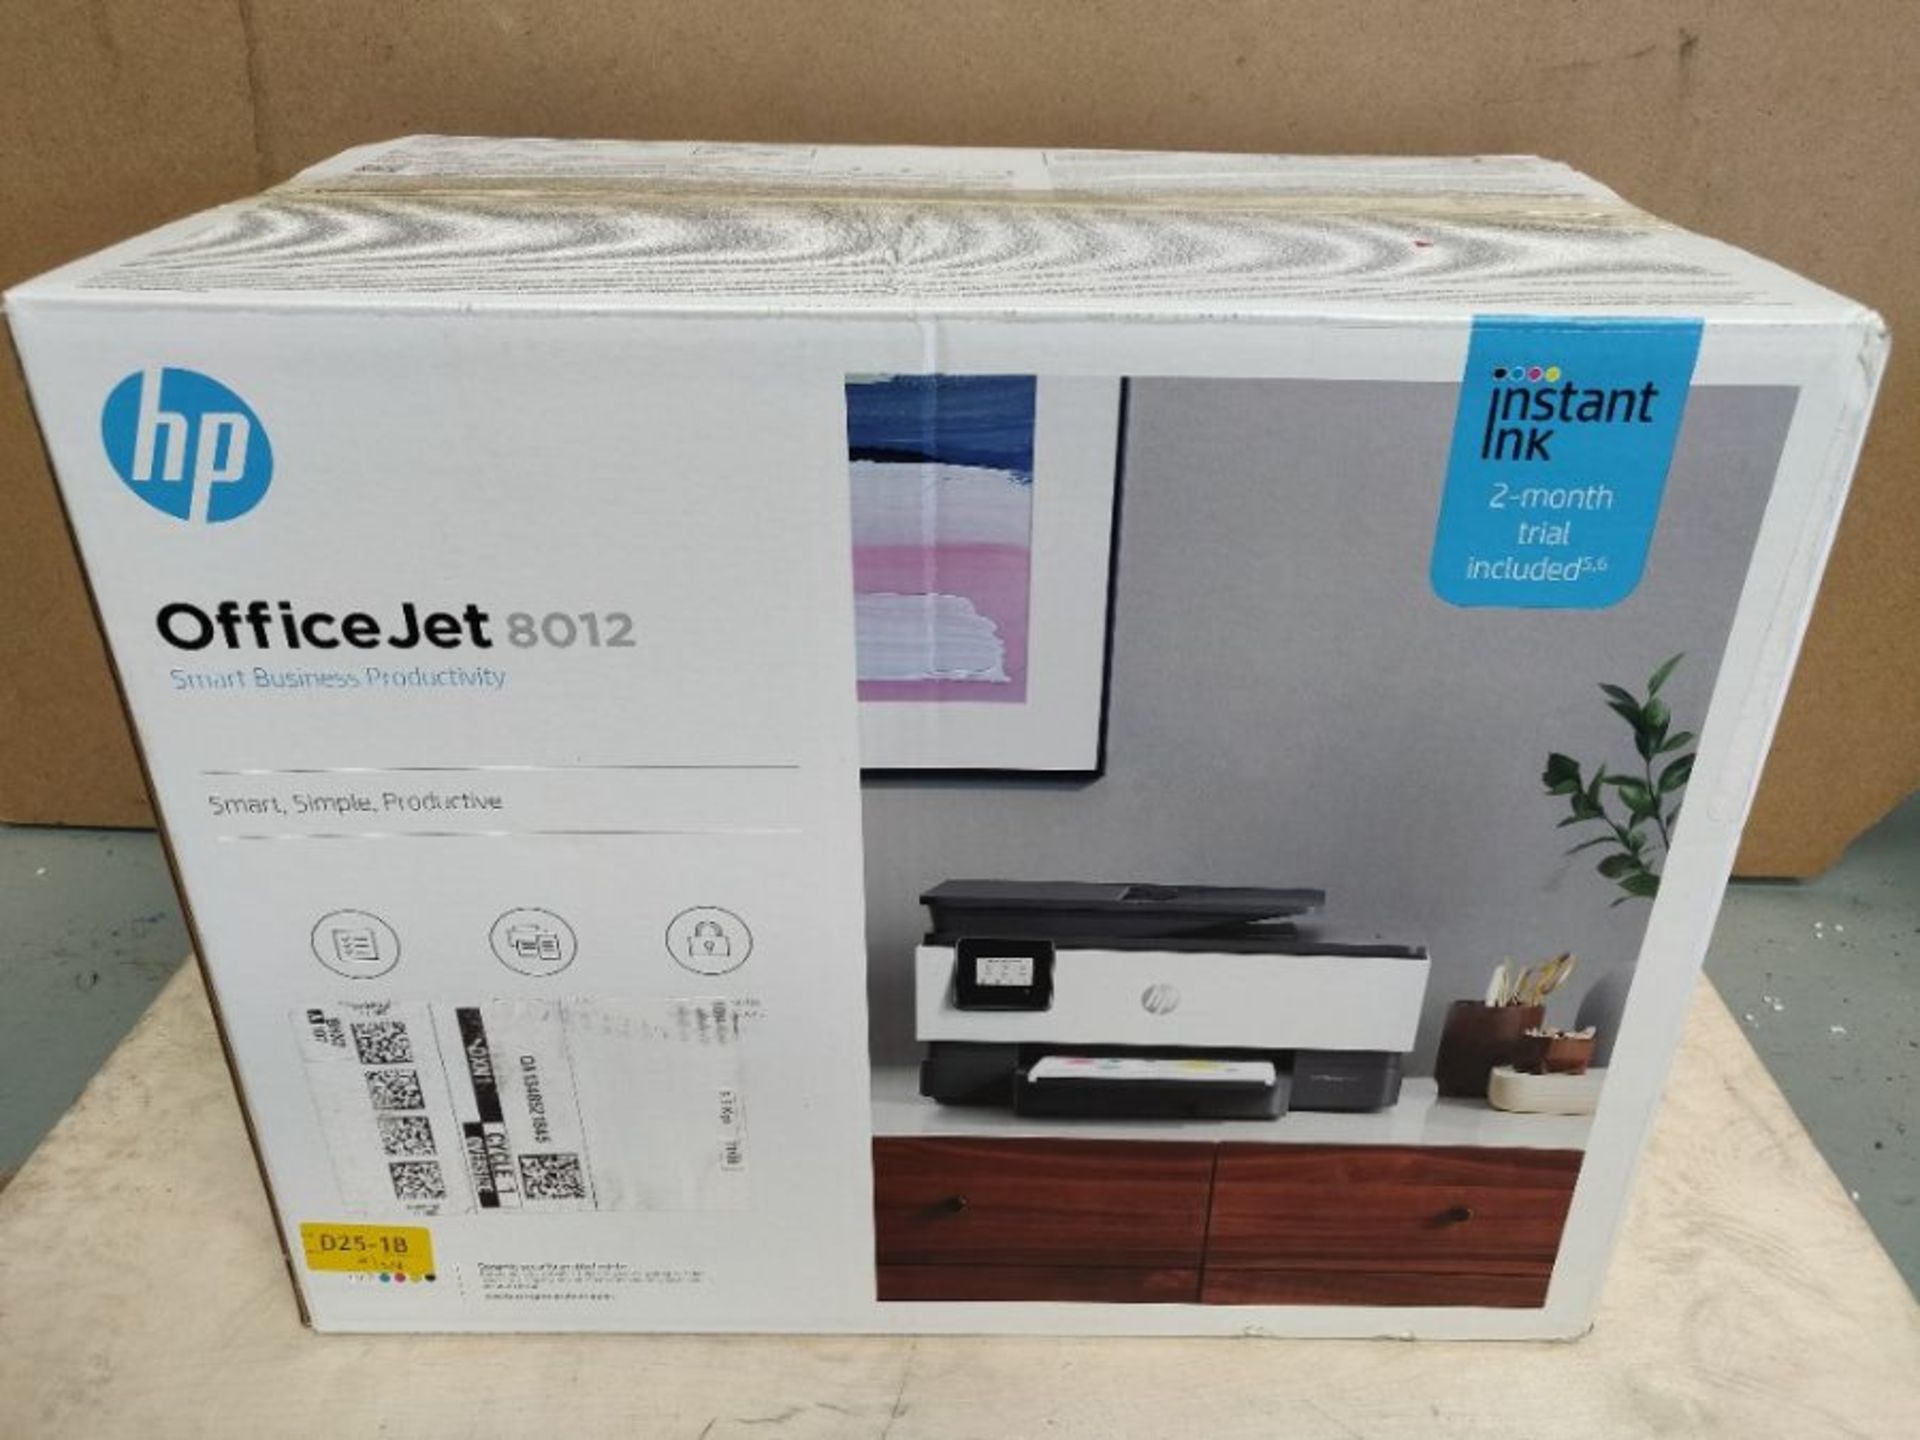 RRP £89.00 HP OfficeJet 8012 All-in-One Wireless Printer, Instant Ink Ready with 2 Months Trial I - Image 2 of 3